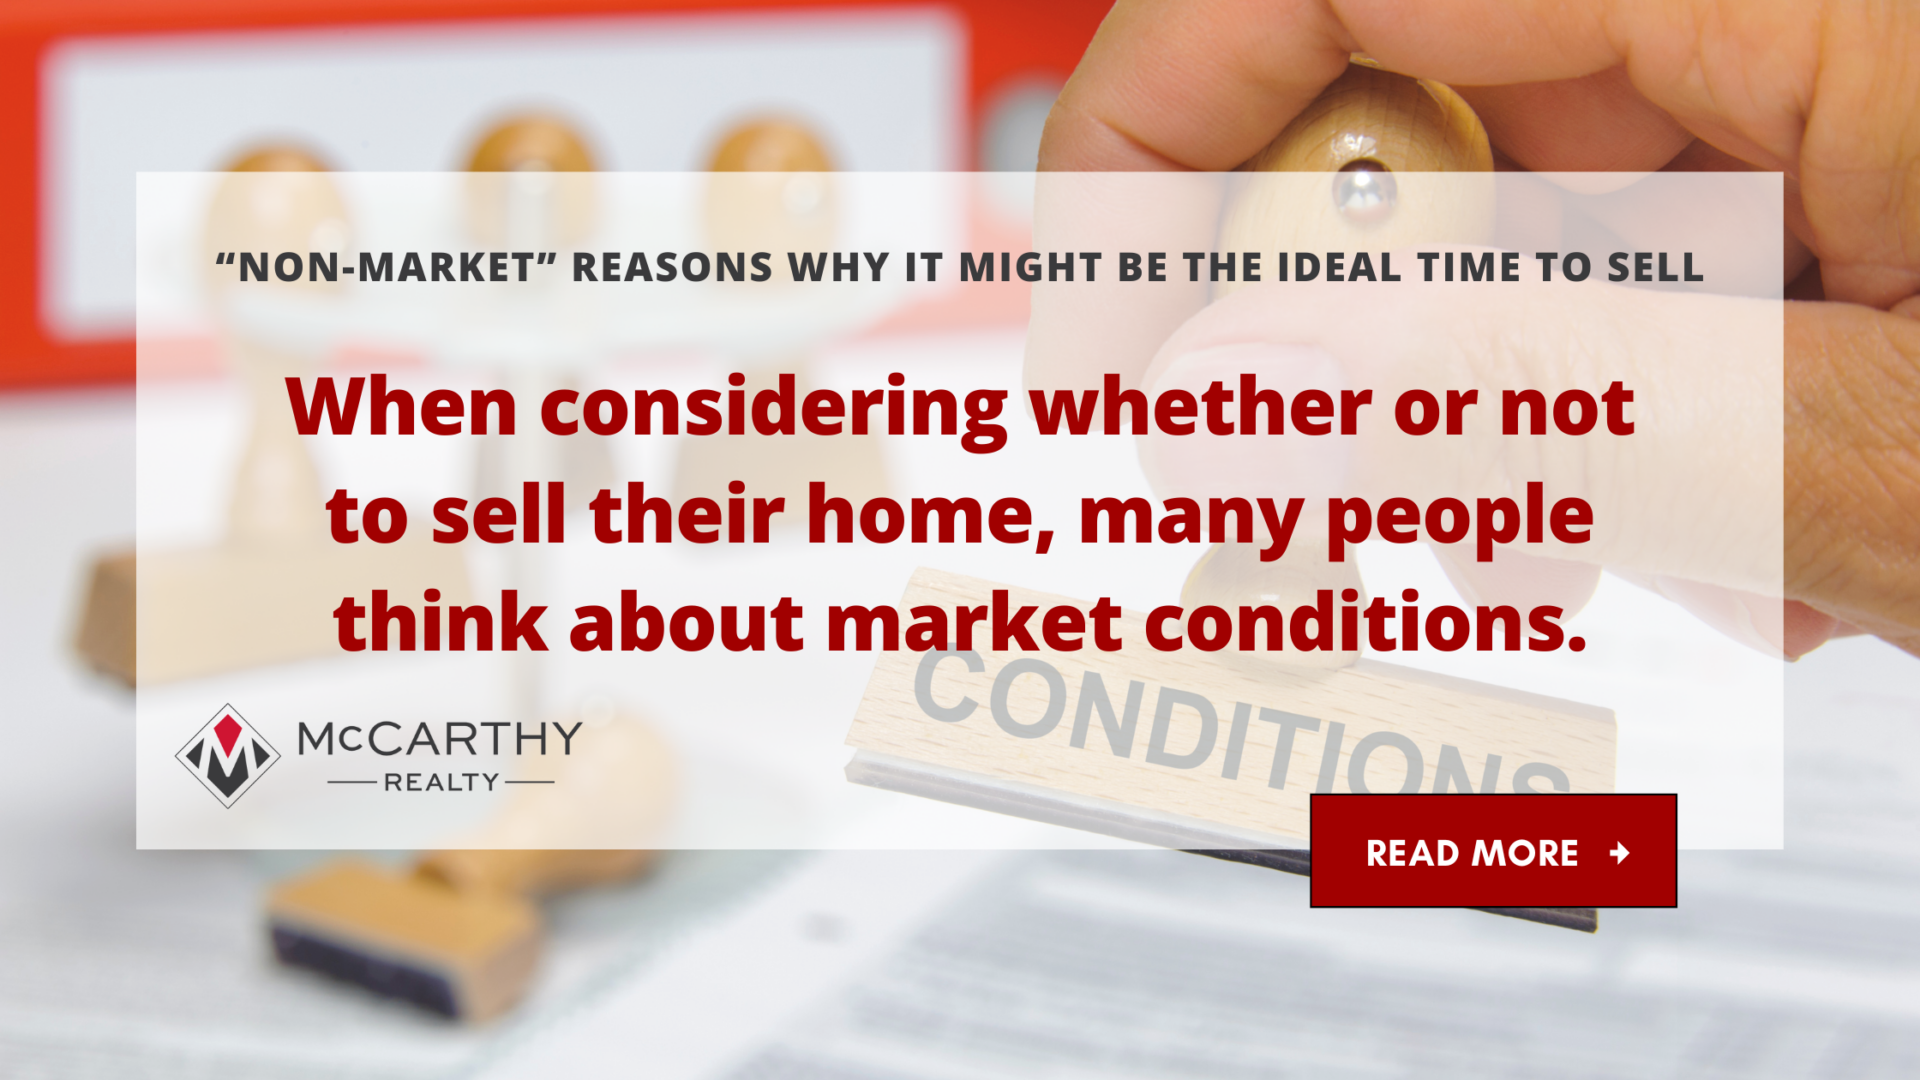 “Non-Market” Reasons Why it Might Be the Ideal Time to Sell